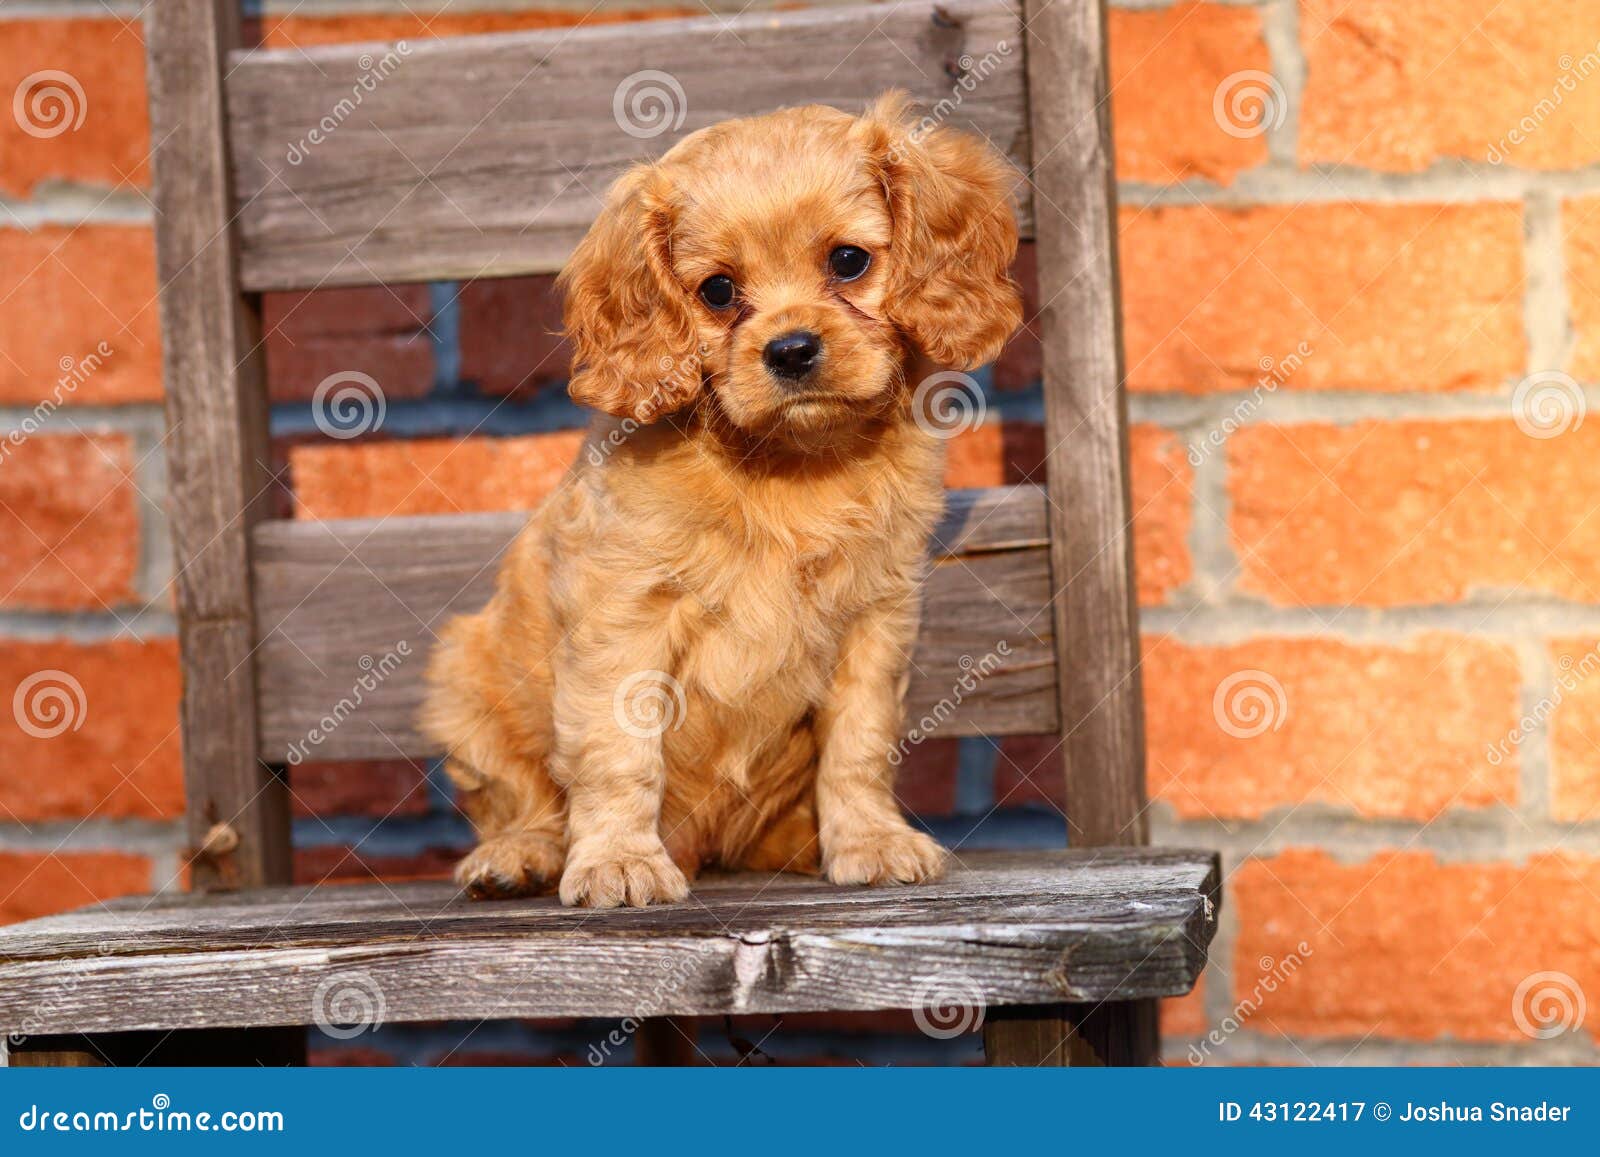 A Beautiful Cavalier King Charles Spaniel Mix Puppy Sits On An Old Chair Stock Image Image Of Curious Small 43122417